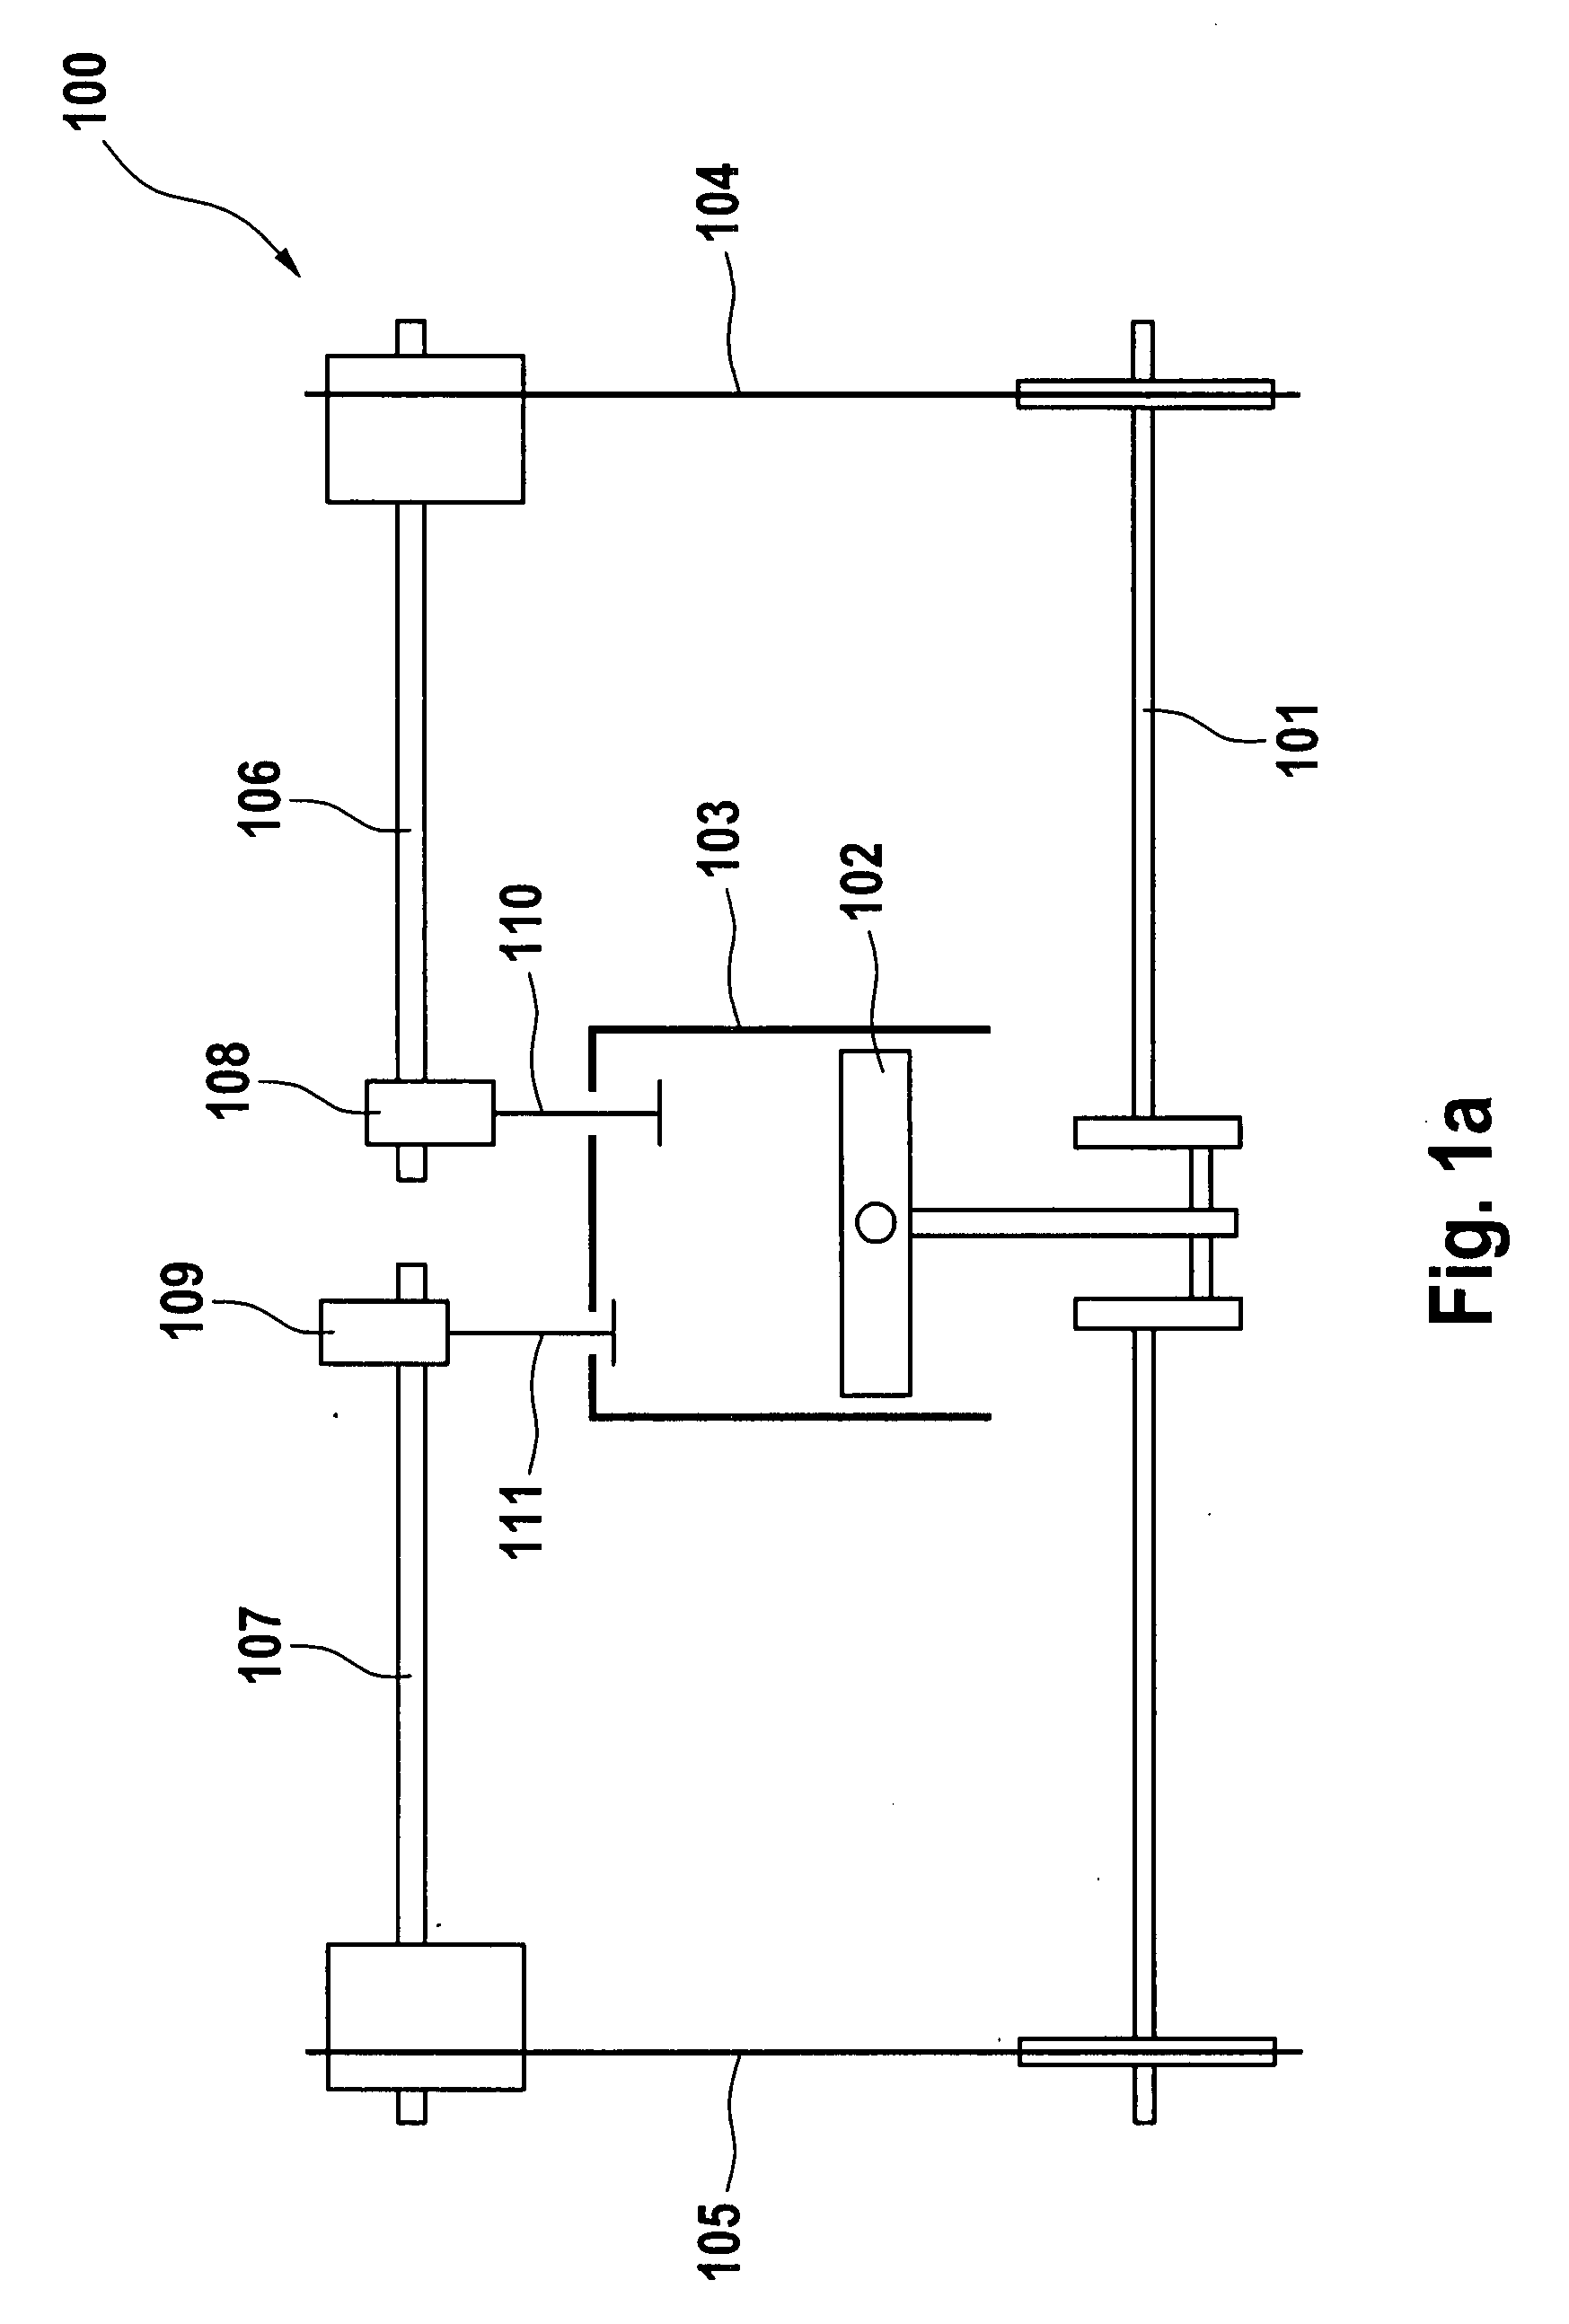 Device For Varying The Control Times Of An Internal Combustion Engine